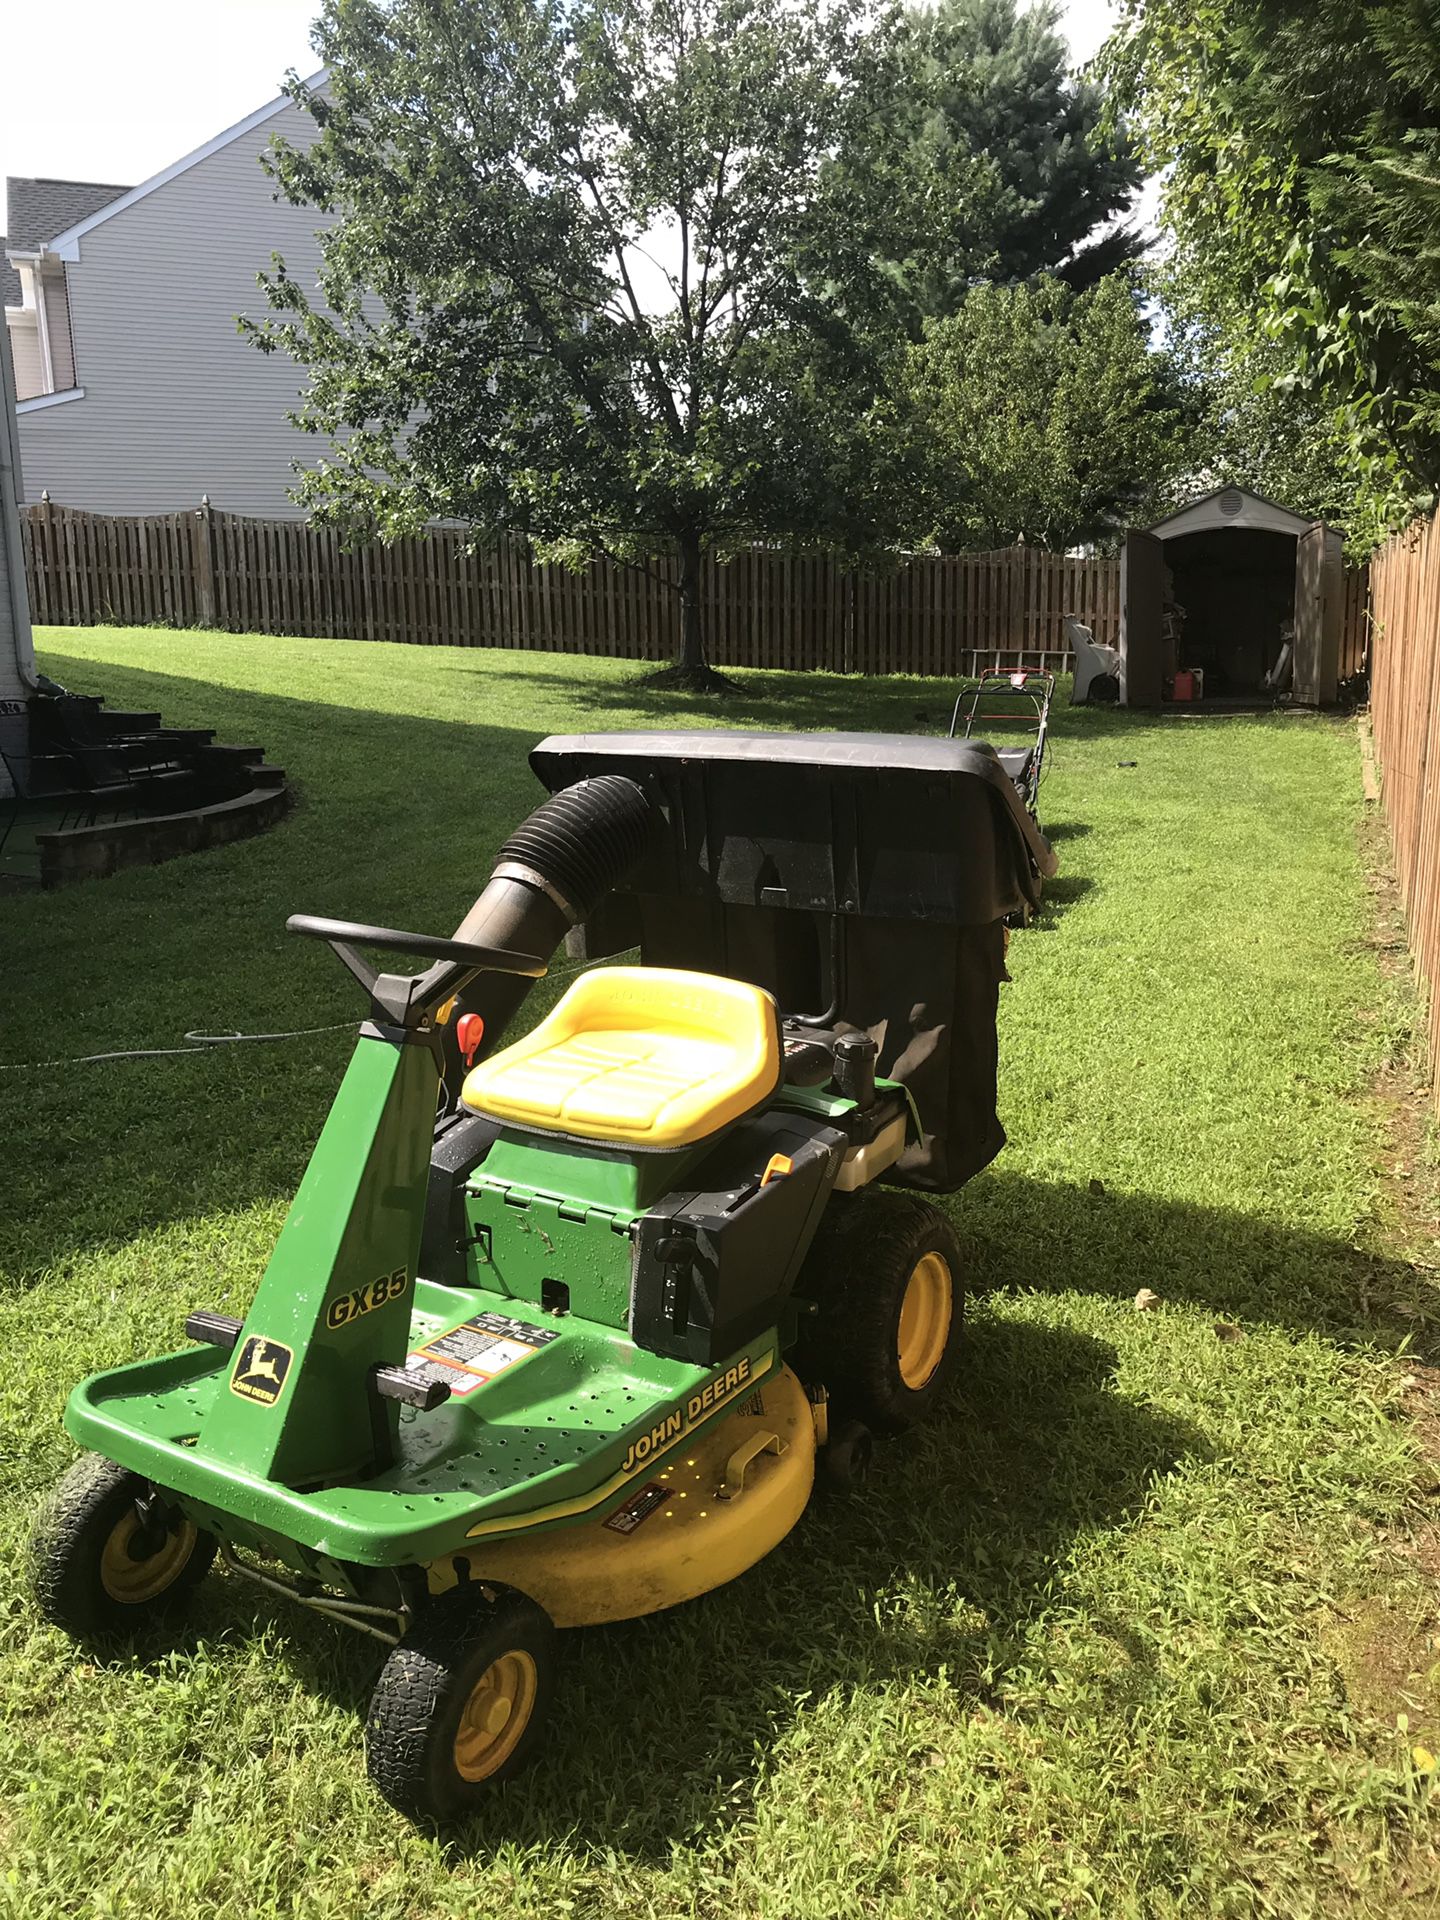 John Deere, W/two Xtra large grass collectors. Excellent running condition!